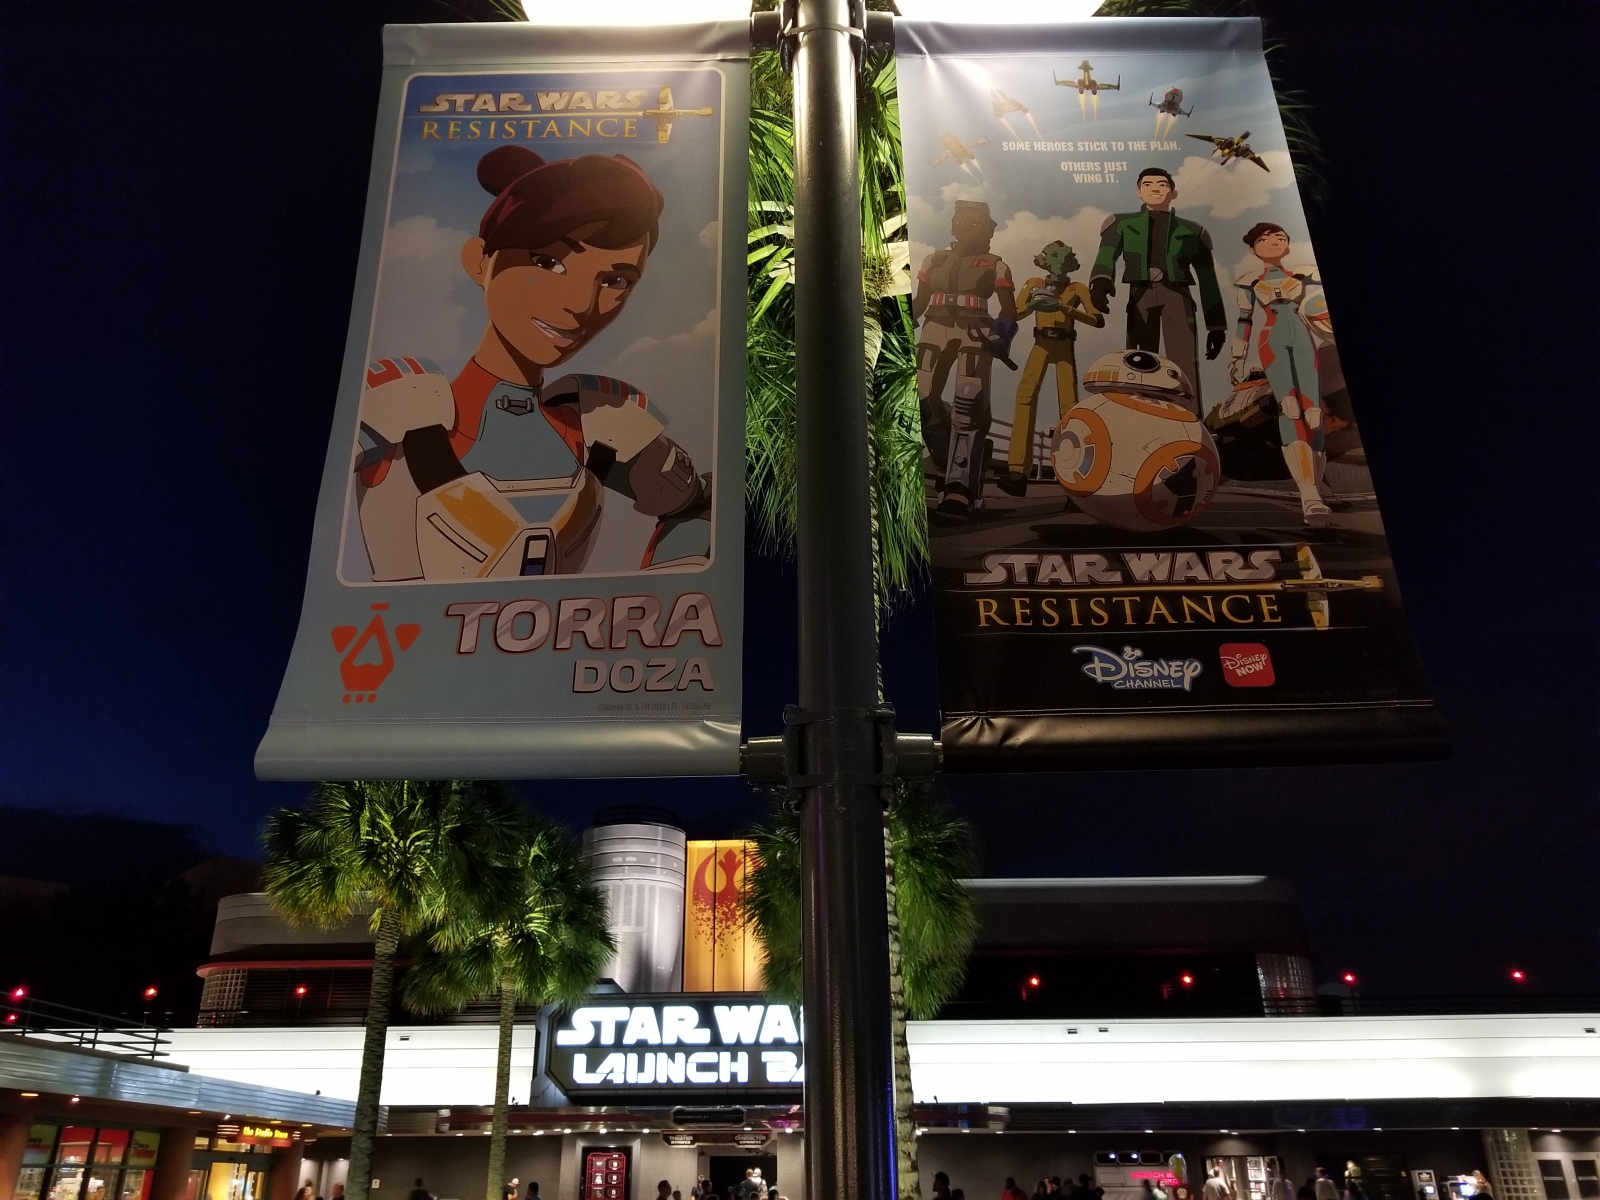 Star Wars Resistance banners